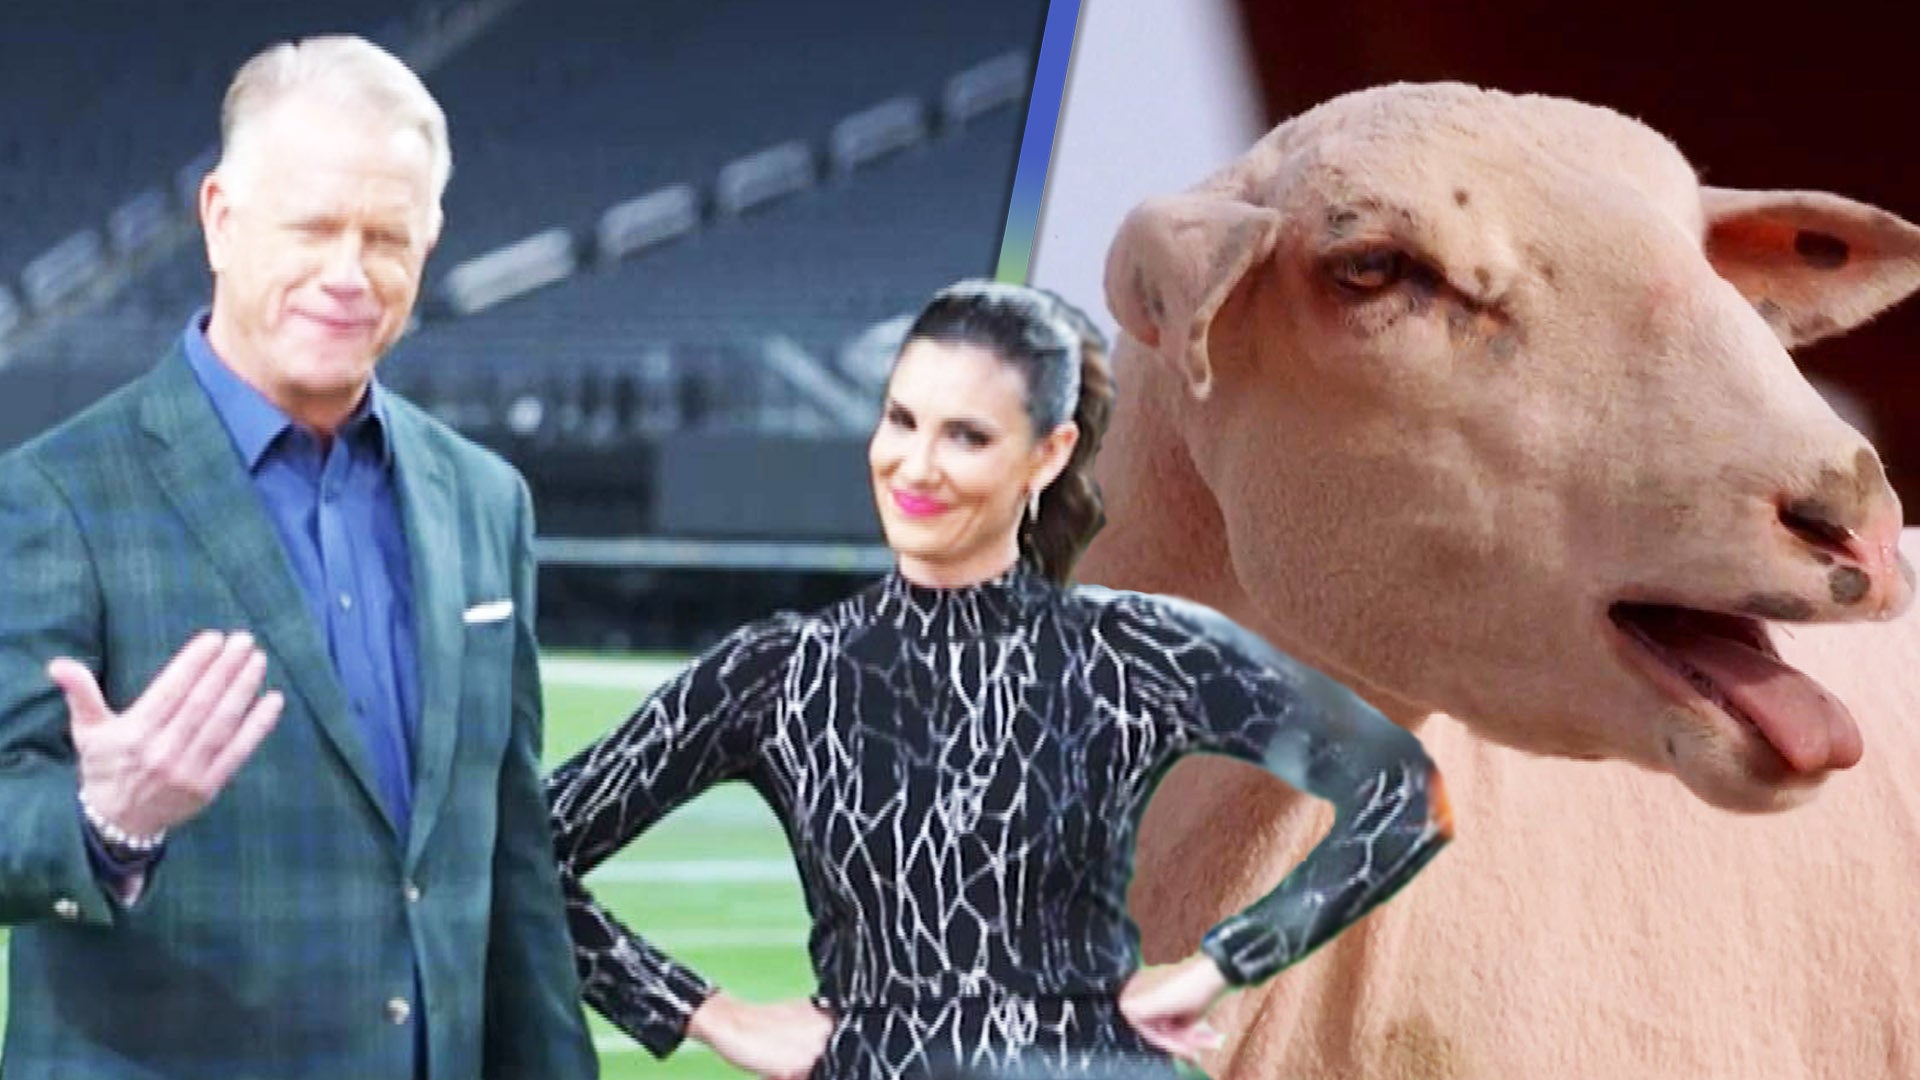 Inside 'Super Bowl Greatest Commercials' With Boomer Esiason and Daniela Ruah (Exclusive)